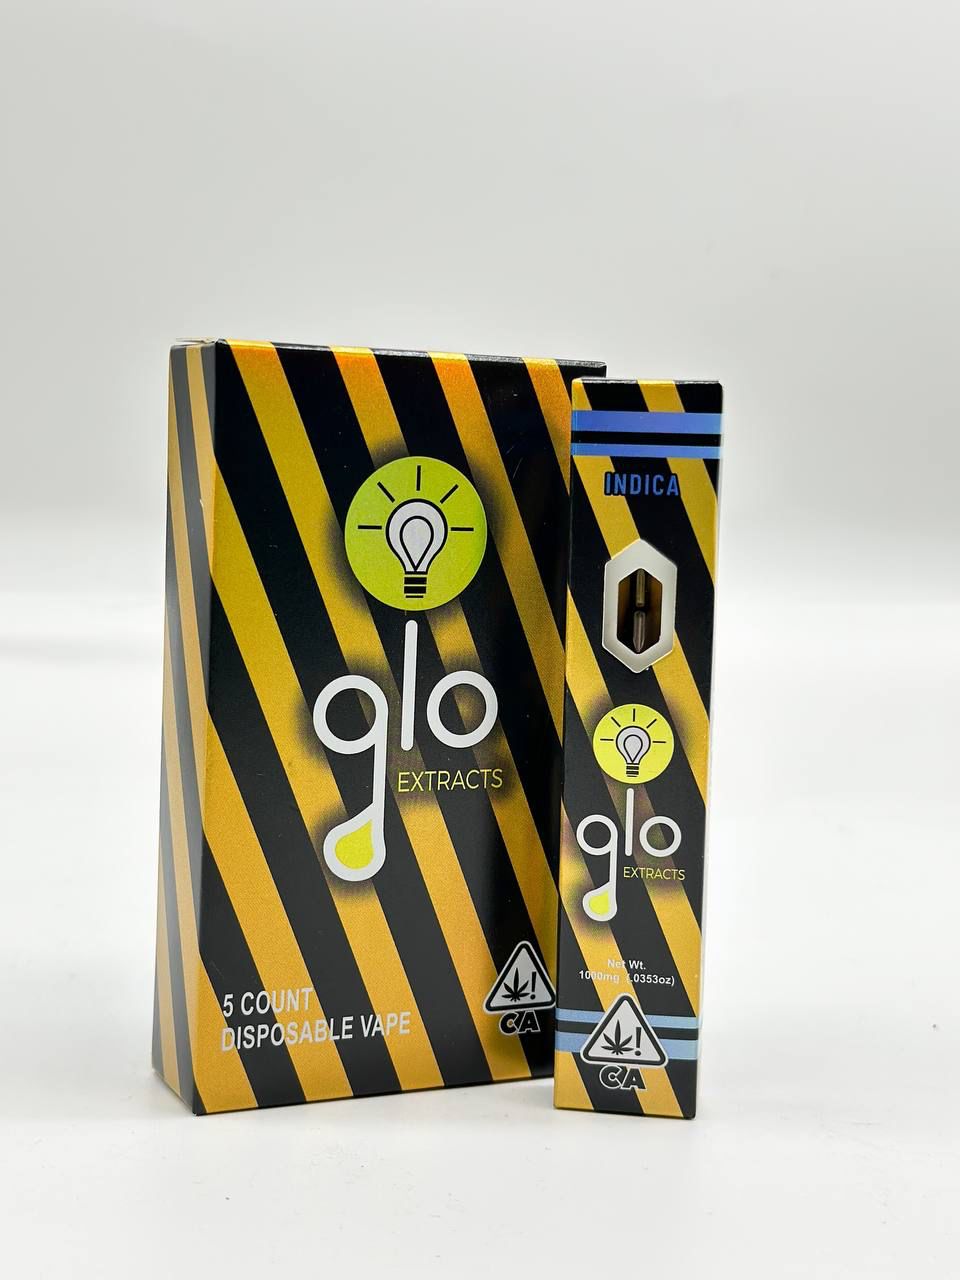 GLO EXTRACTS 5 COUNT DISPOSABLE